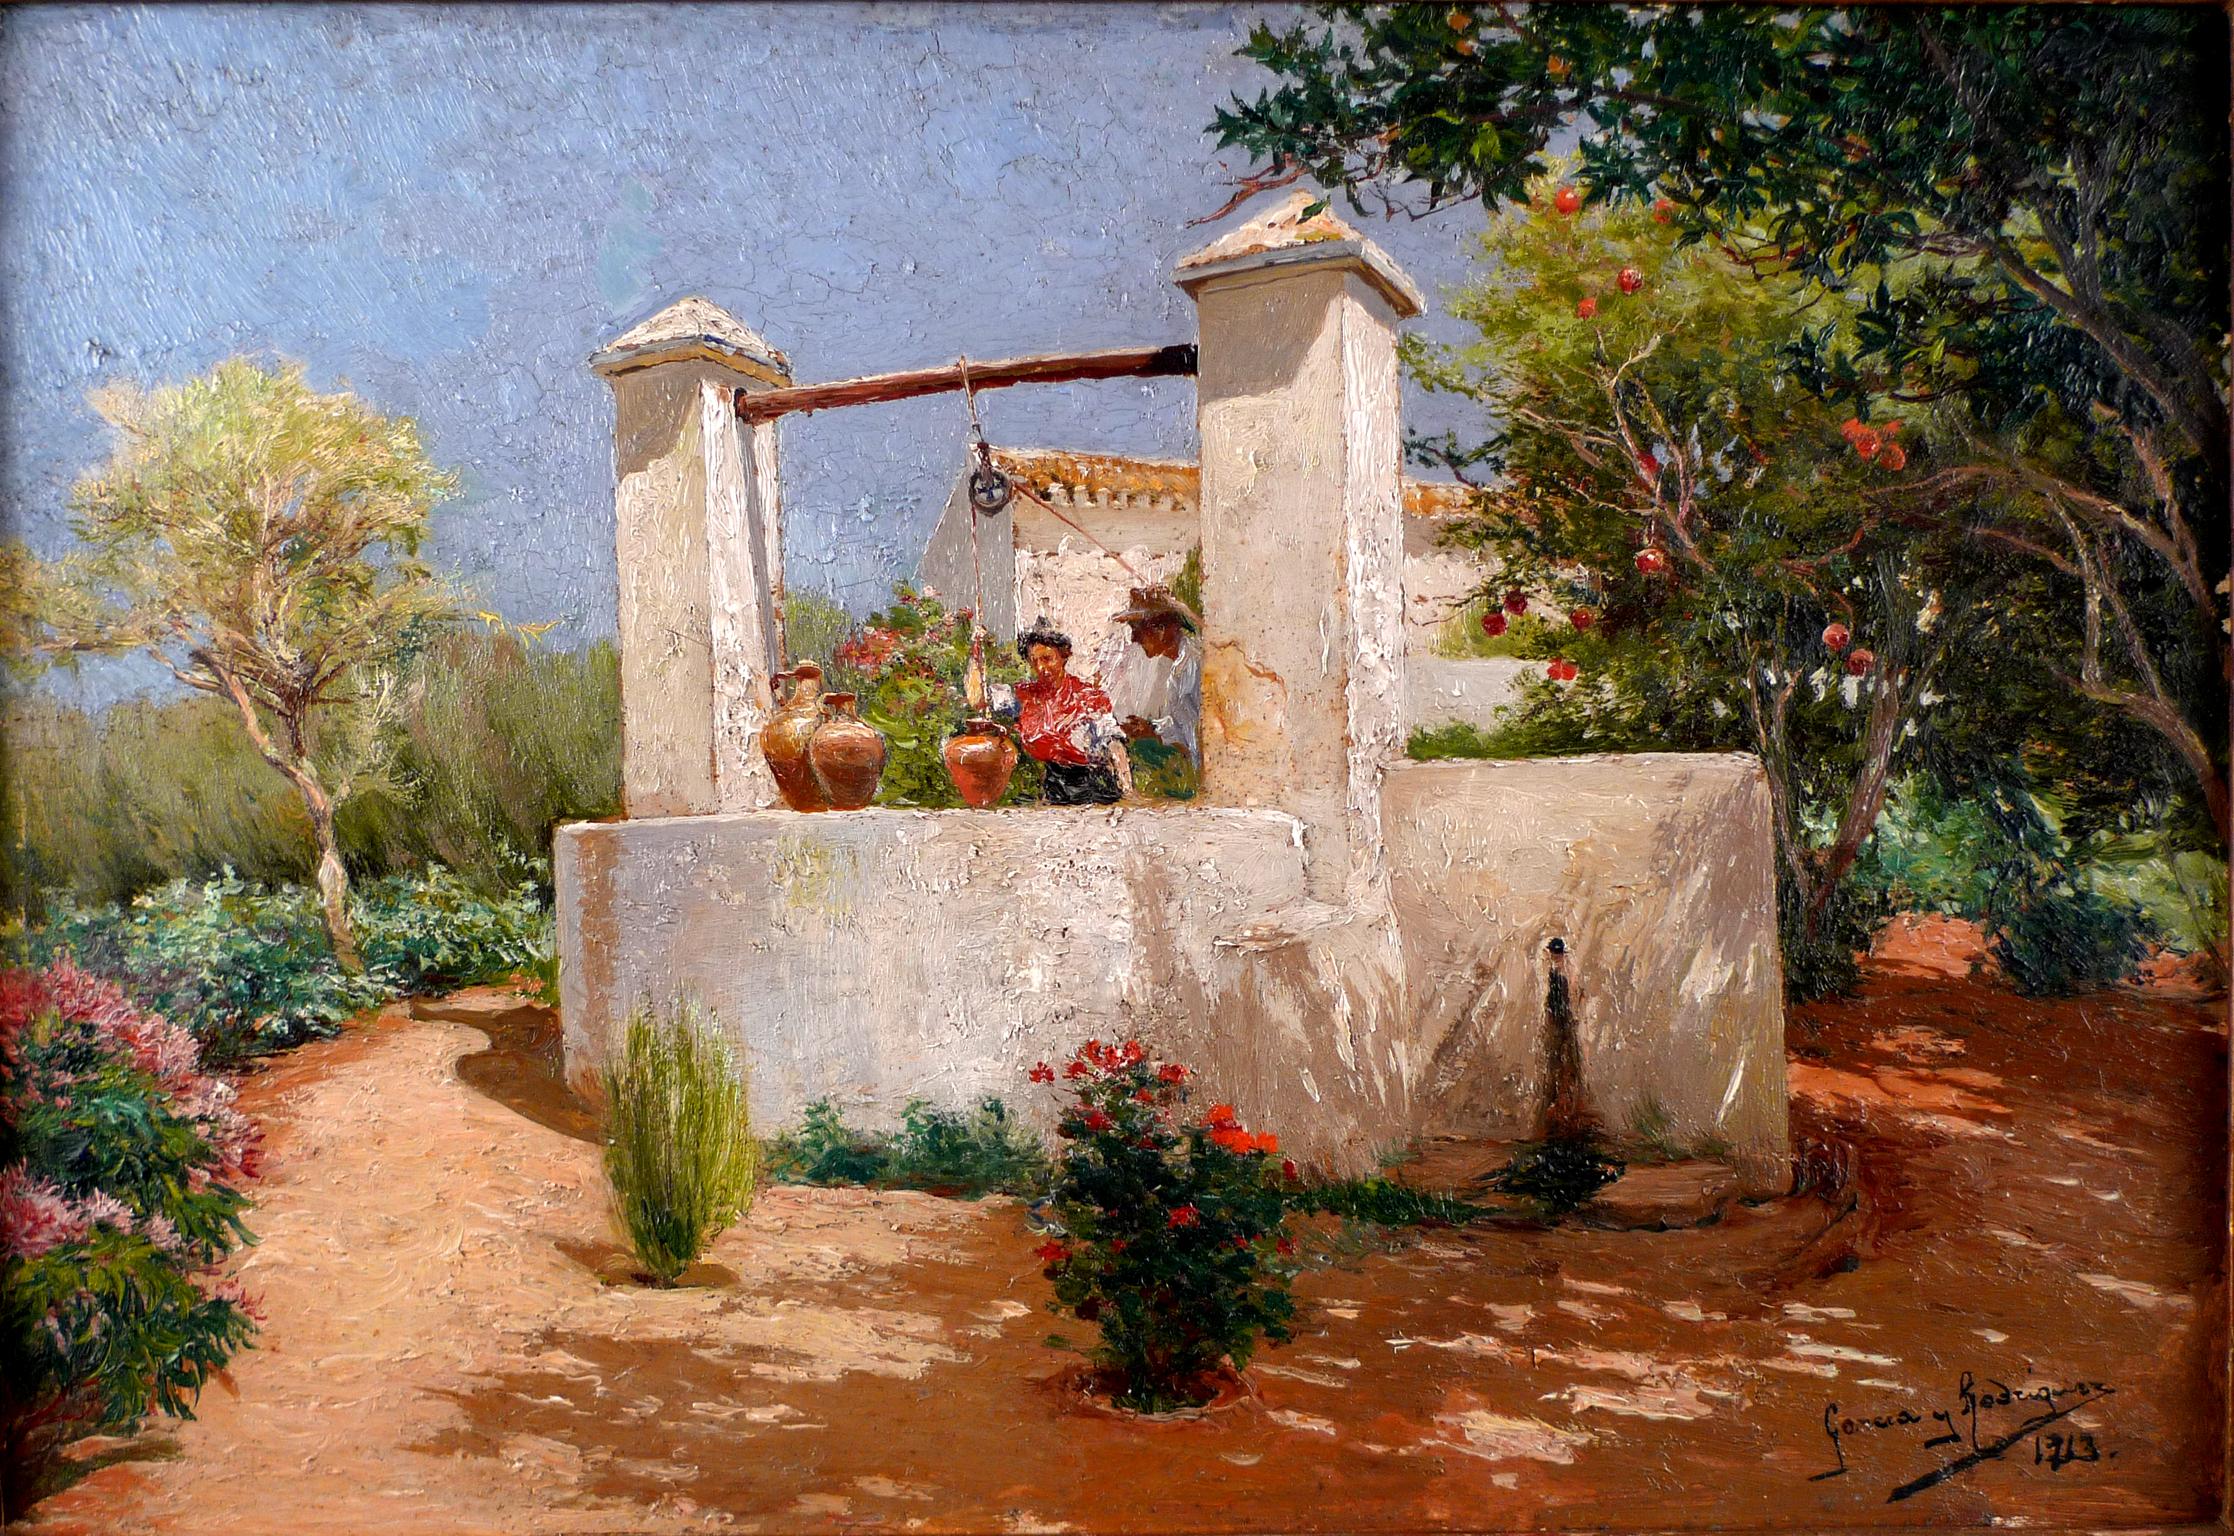 "Flirting at the Well", Early 20th Century Oil on Panel by M. García y Rodríguez